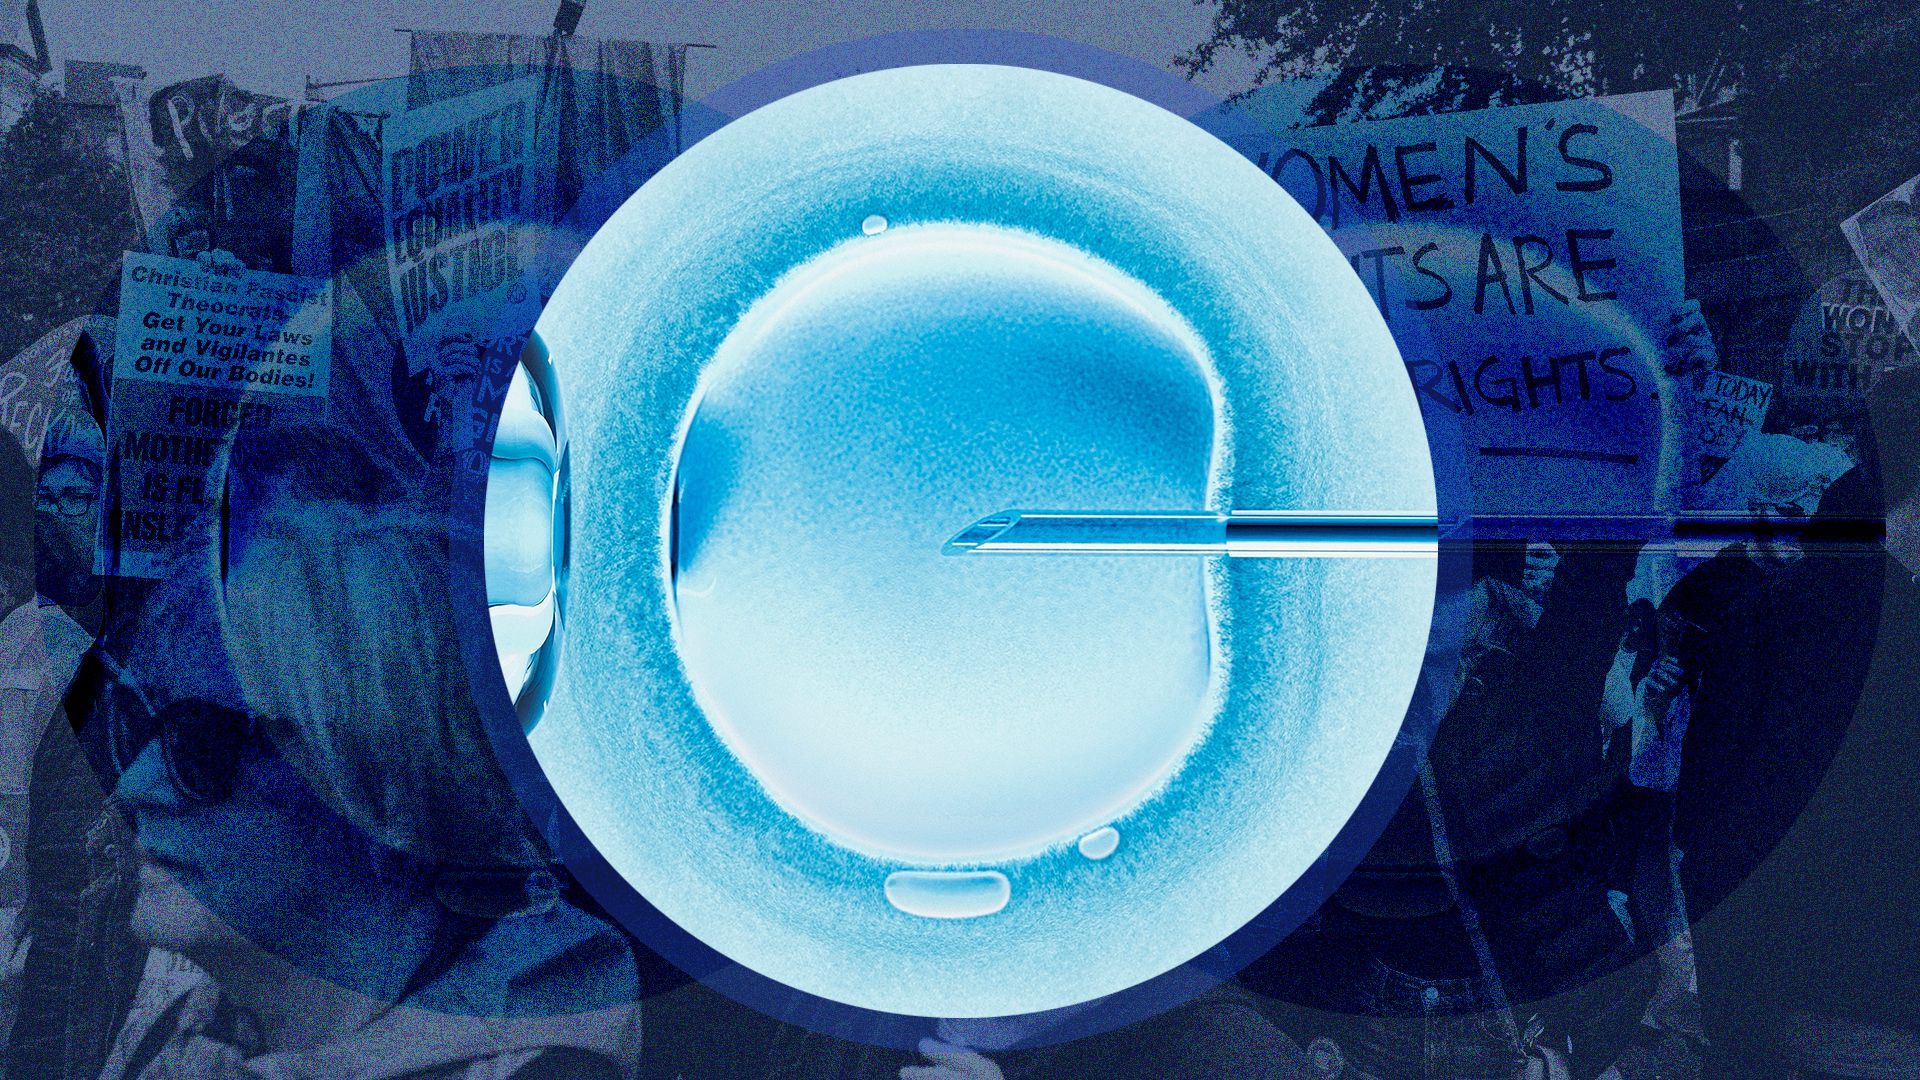 Photo illustration of a crowd of protestors for women's rights behind a close-up image of in vitro fertilization 